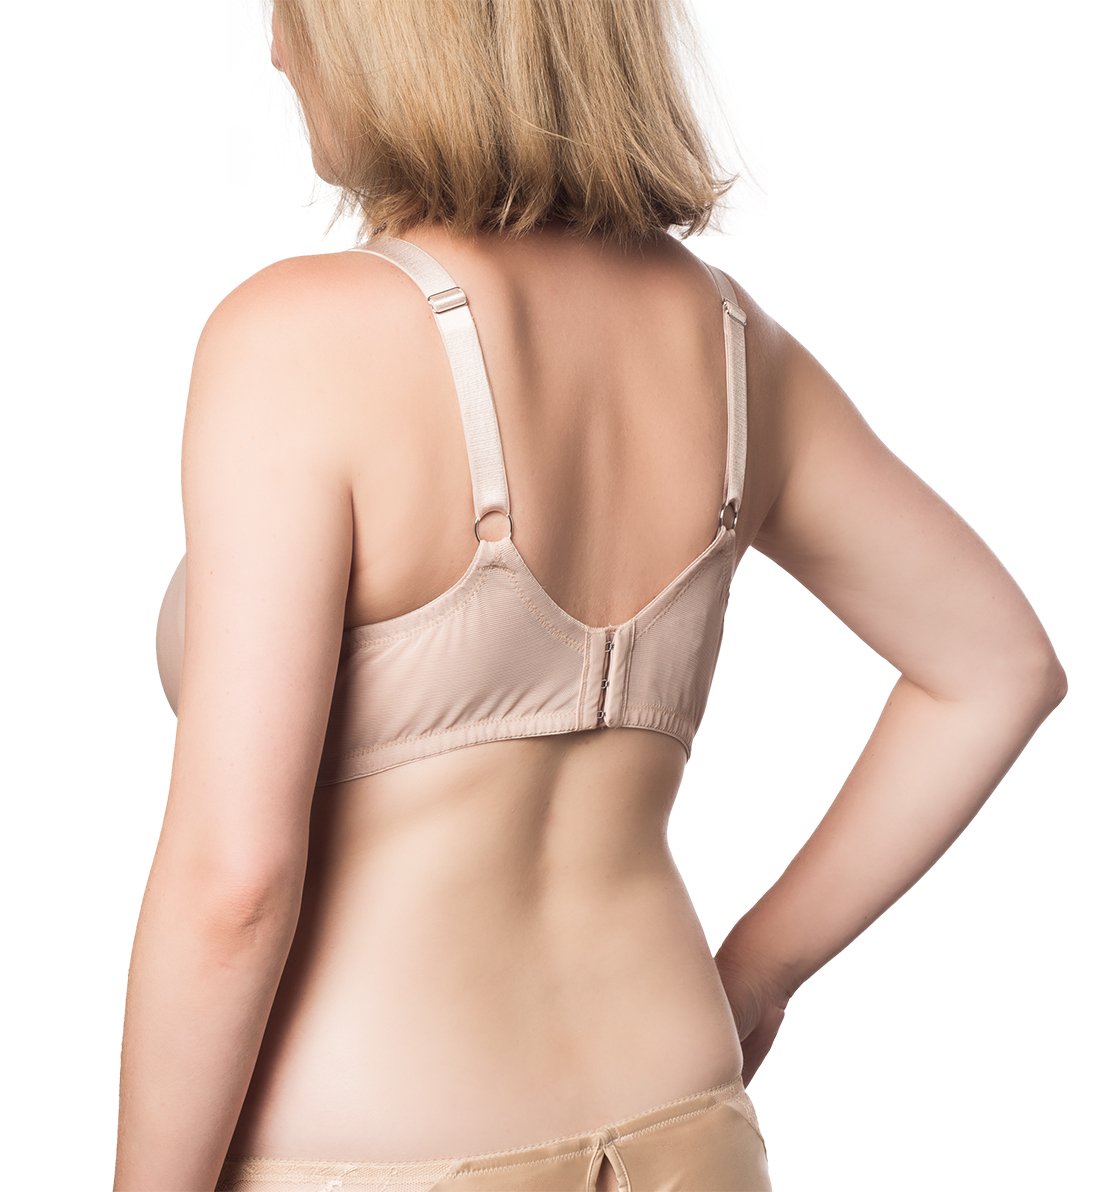 hotmilk Obsession Molded Spacer Flexi-Wire A-Frame Nursing Bra (OBN),32F,Nude - Nude,32F